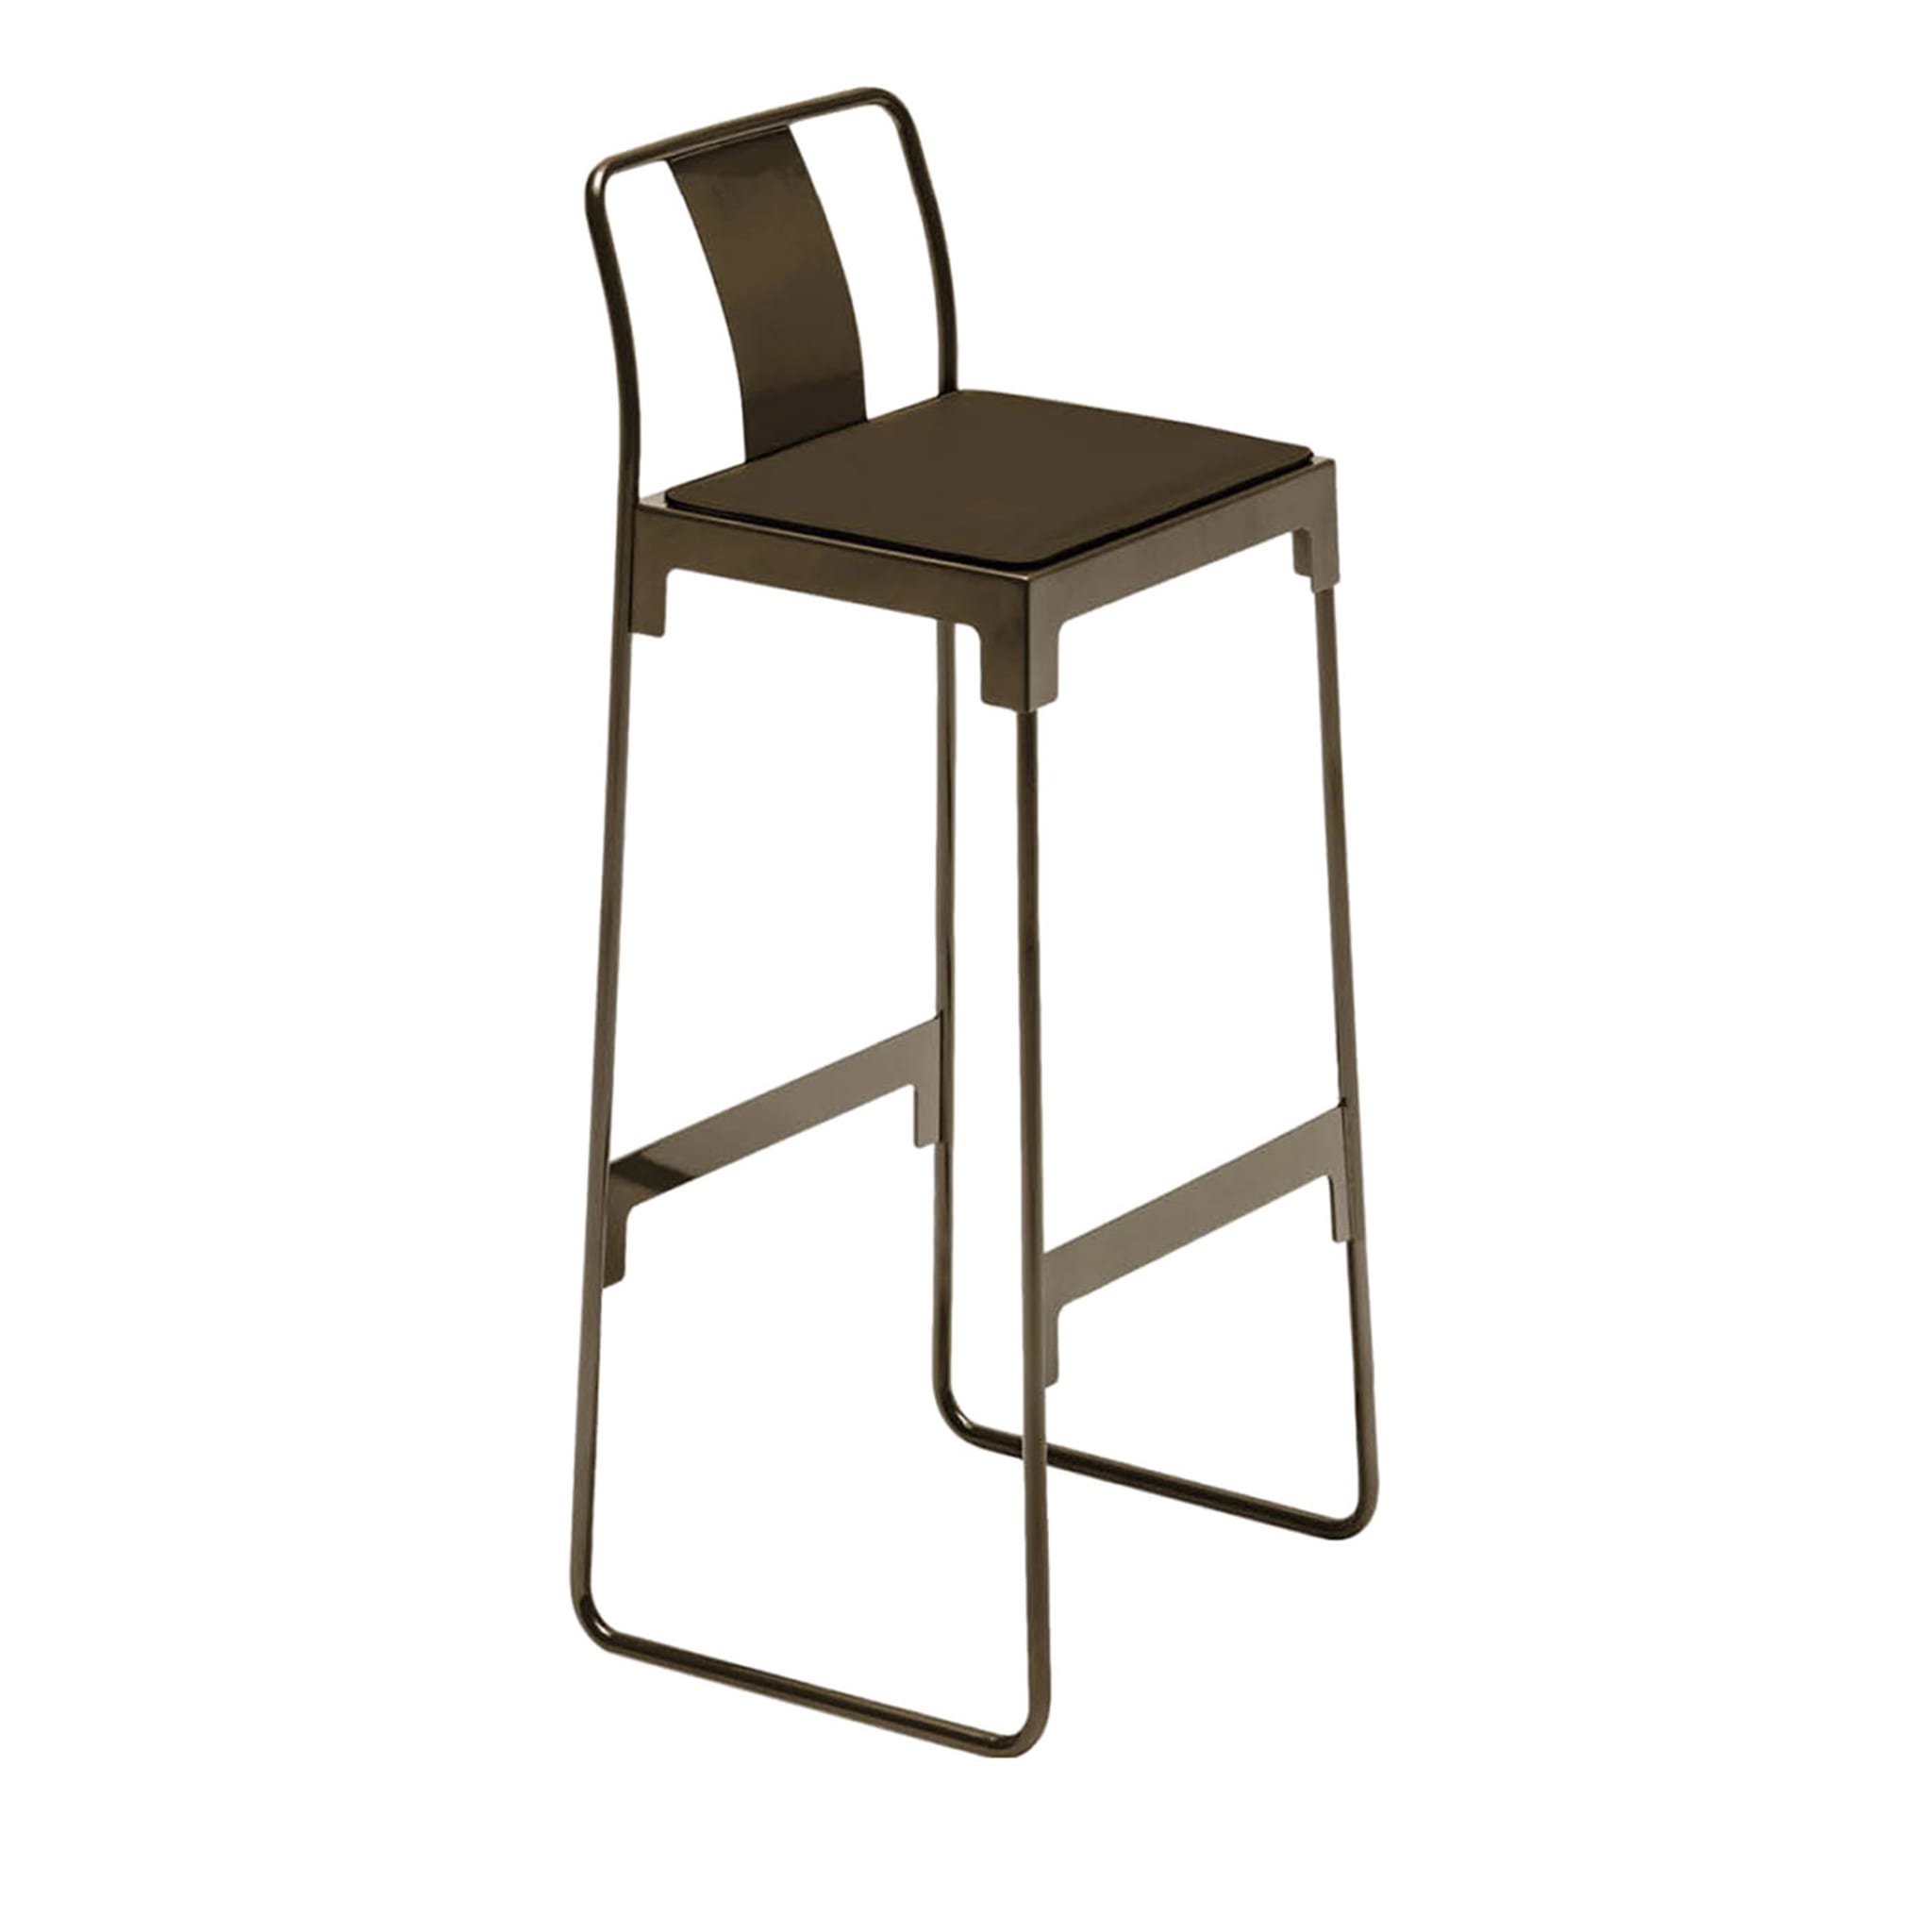 Mingx Low Bronze Stool with Backrest by Konstantin Grcic - Main view